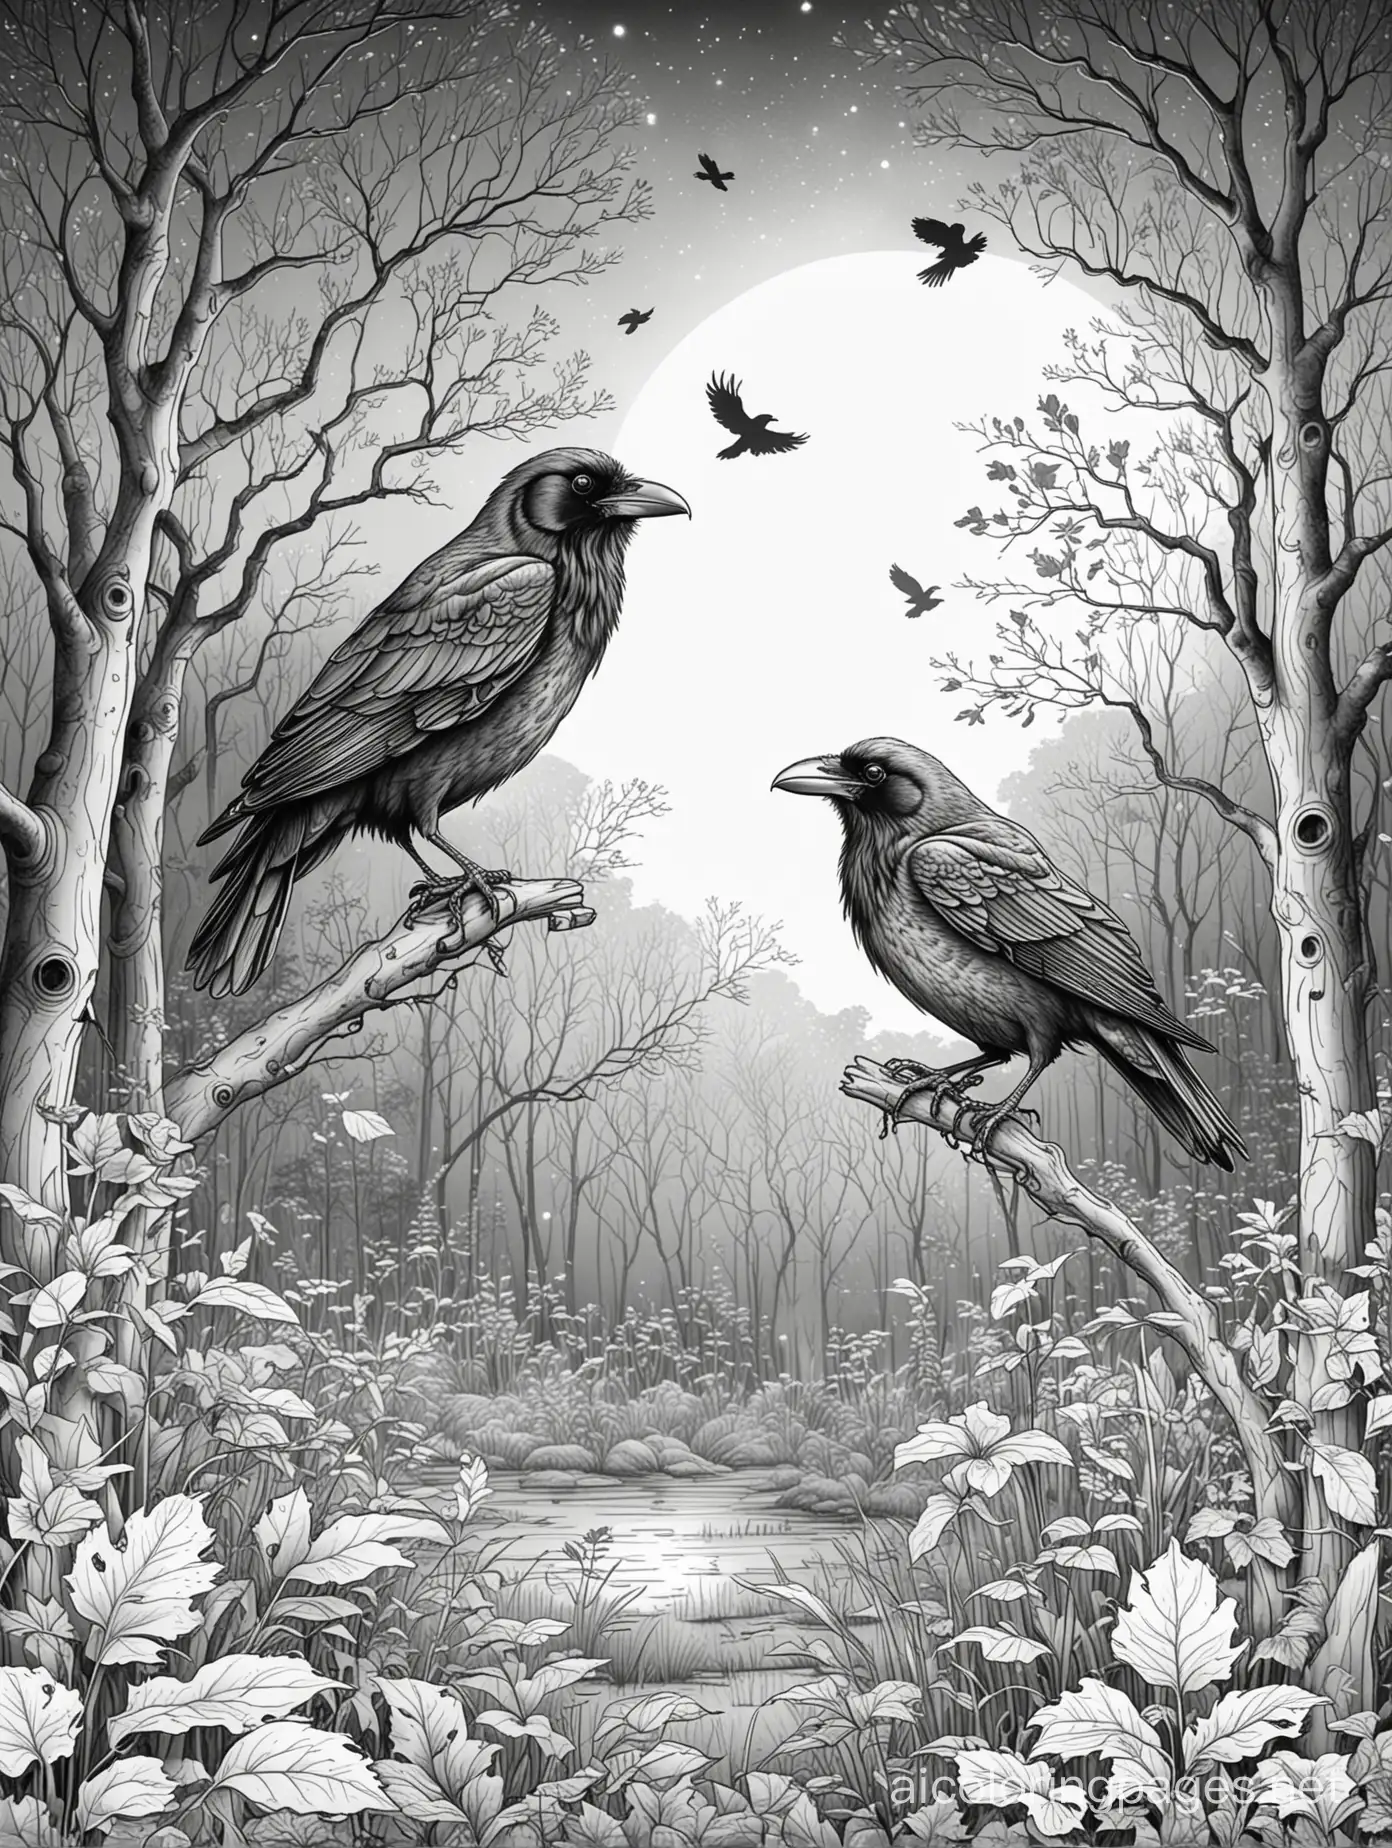 ravens in a moonlit glade, Coloring Page, black and white, line art, white background, Simplicity, Ample White Space. The background of the coloring page is plain white to make it easy for young children to color within the lines. The outlines of all the subjects are easy to distinguish, making it simple for kids to color without too much difficulty